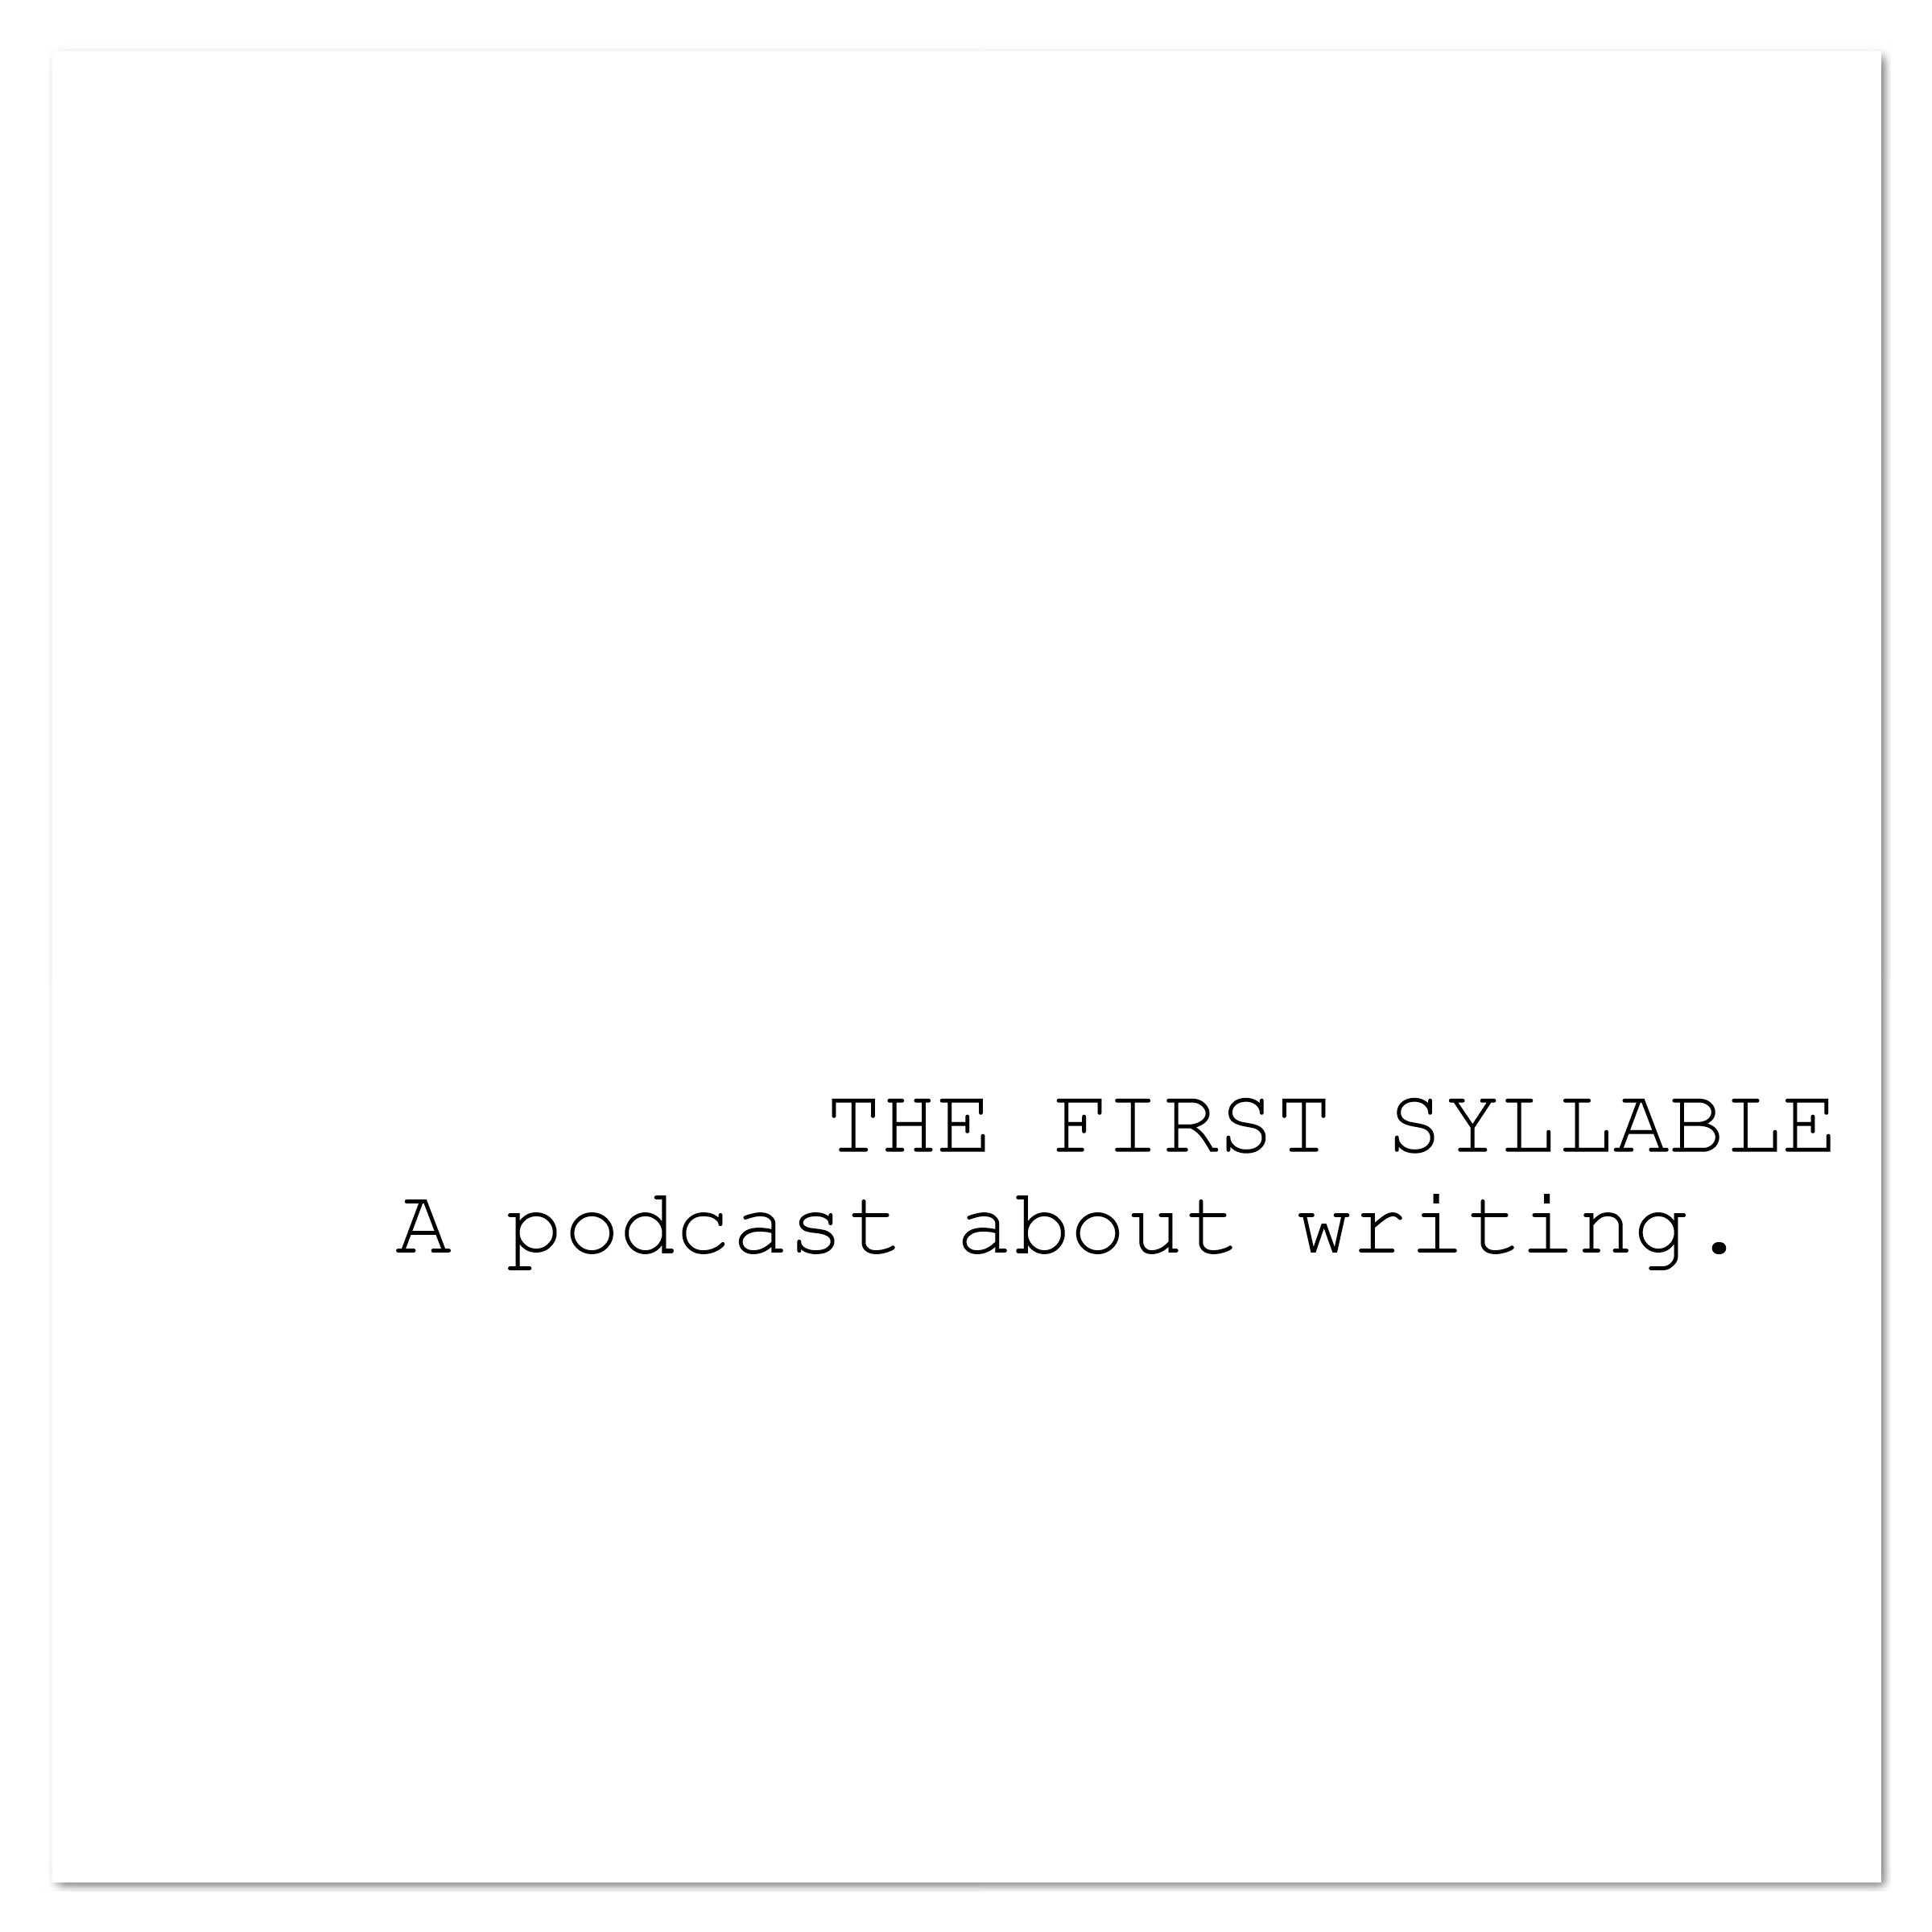 the first syllable: a podcast about writing